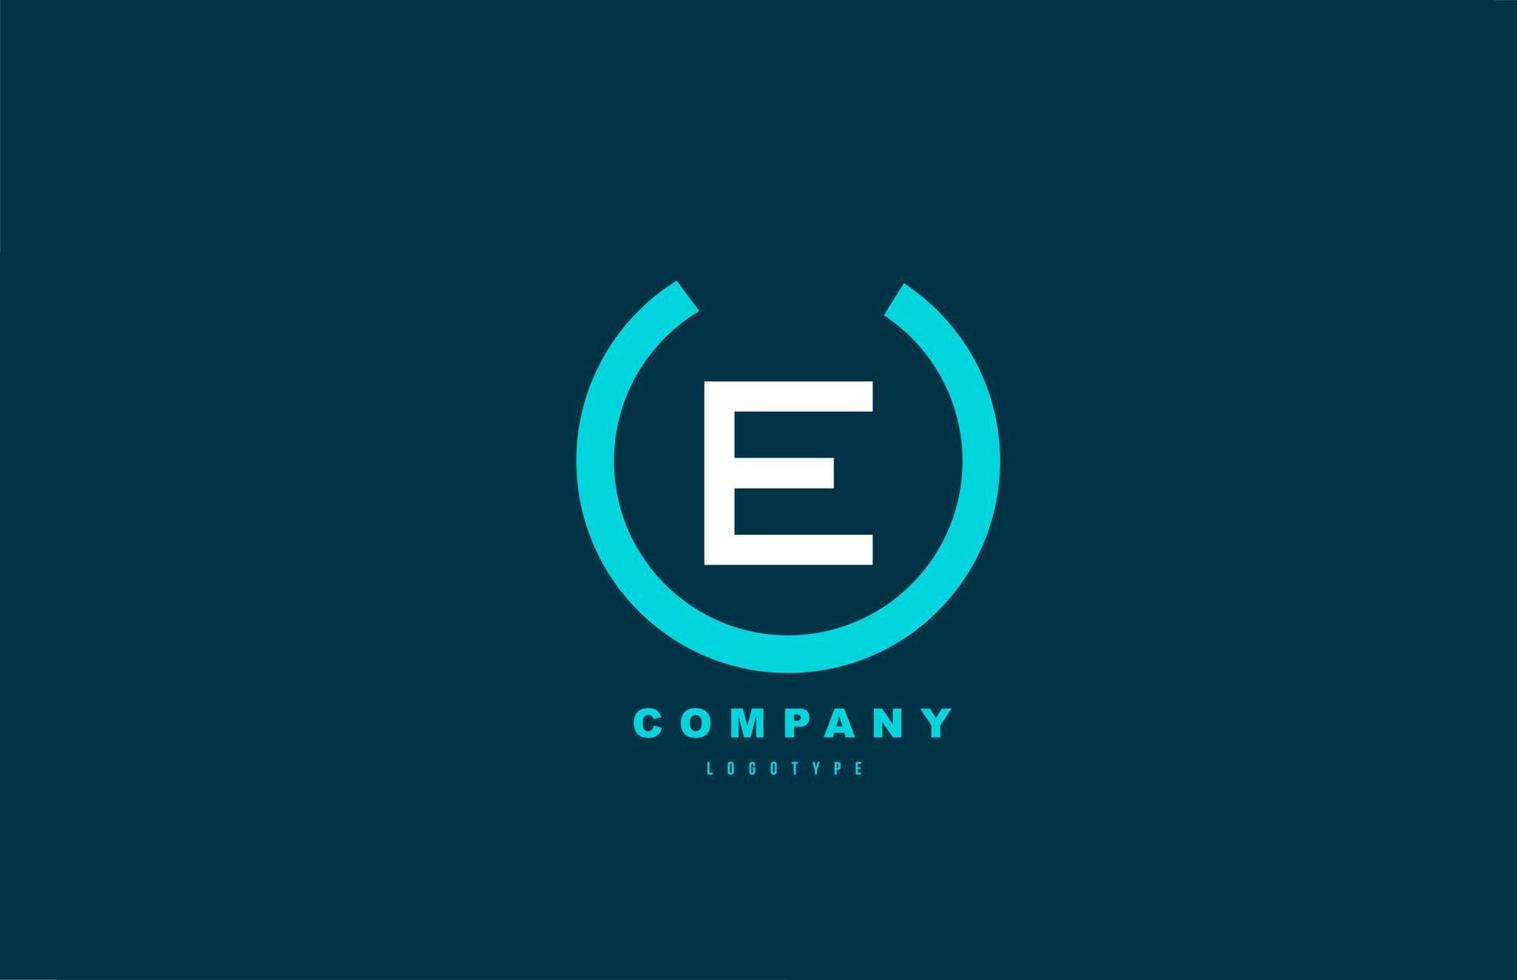 E white and blue letter logo alphabet icon design for company and business vector